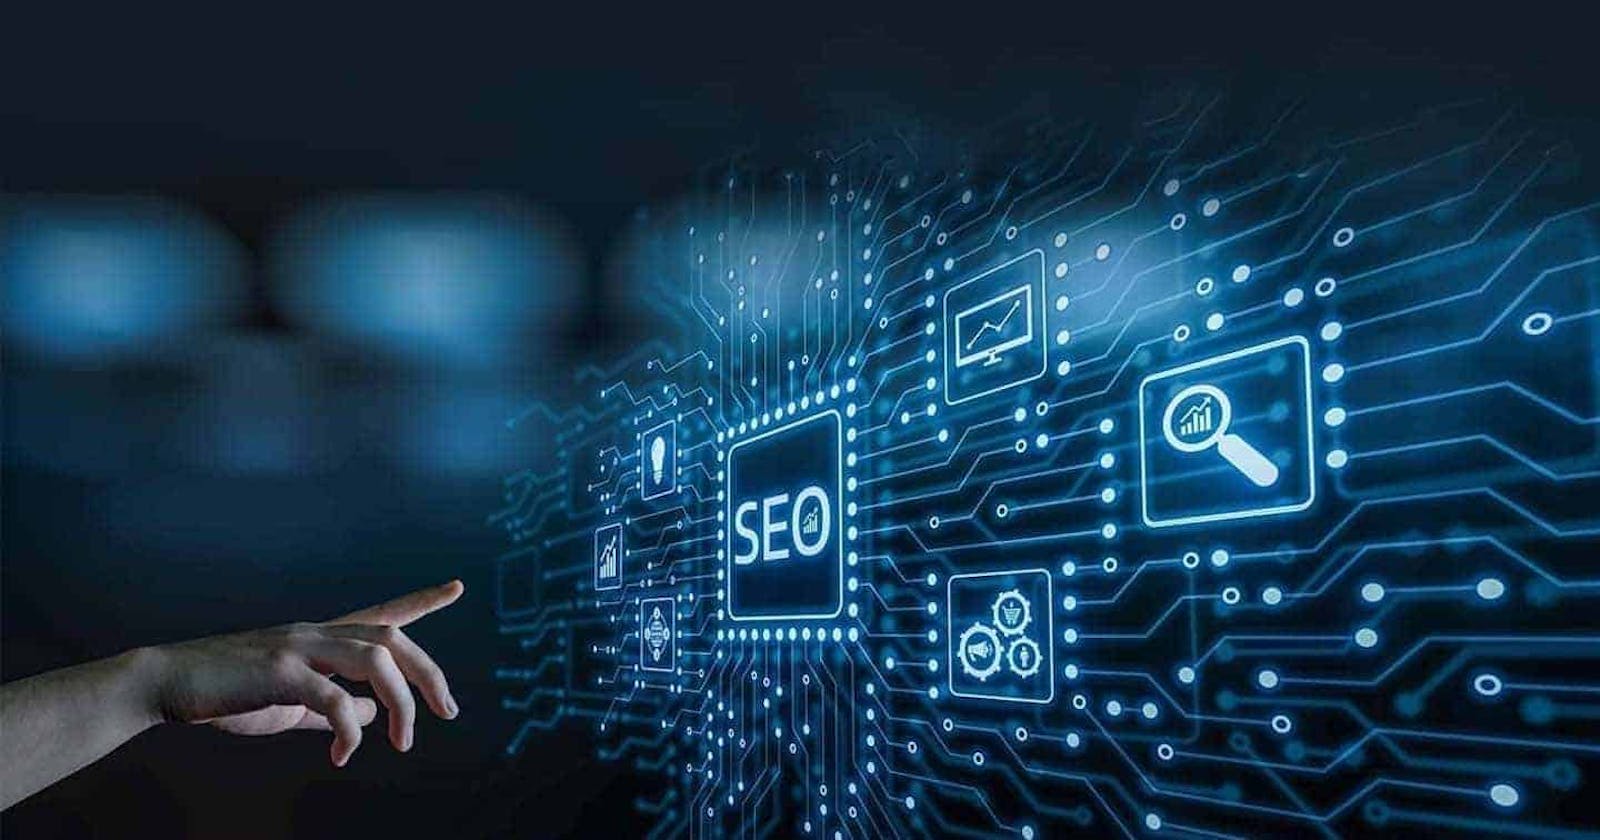 Why Is SEO Important for Businesses